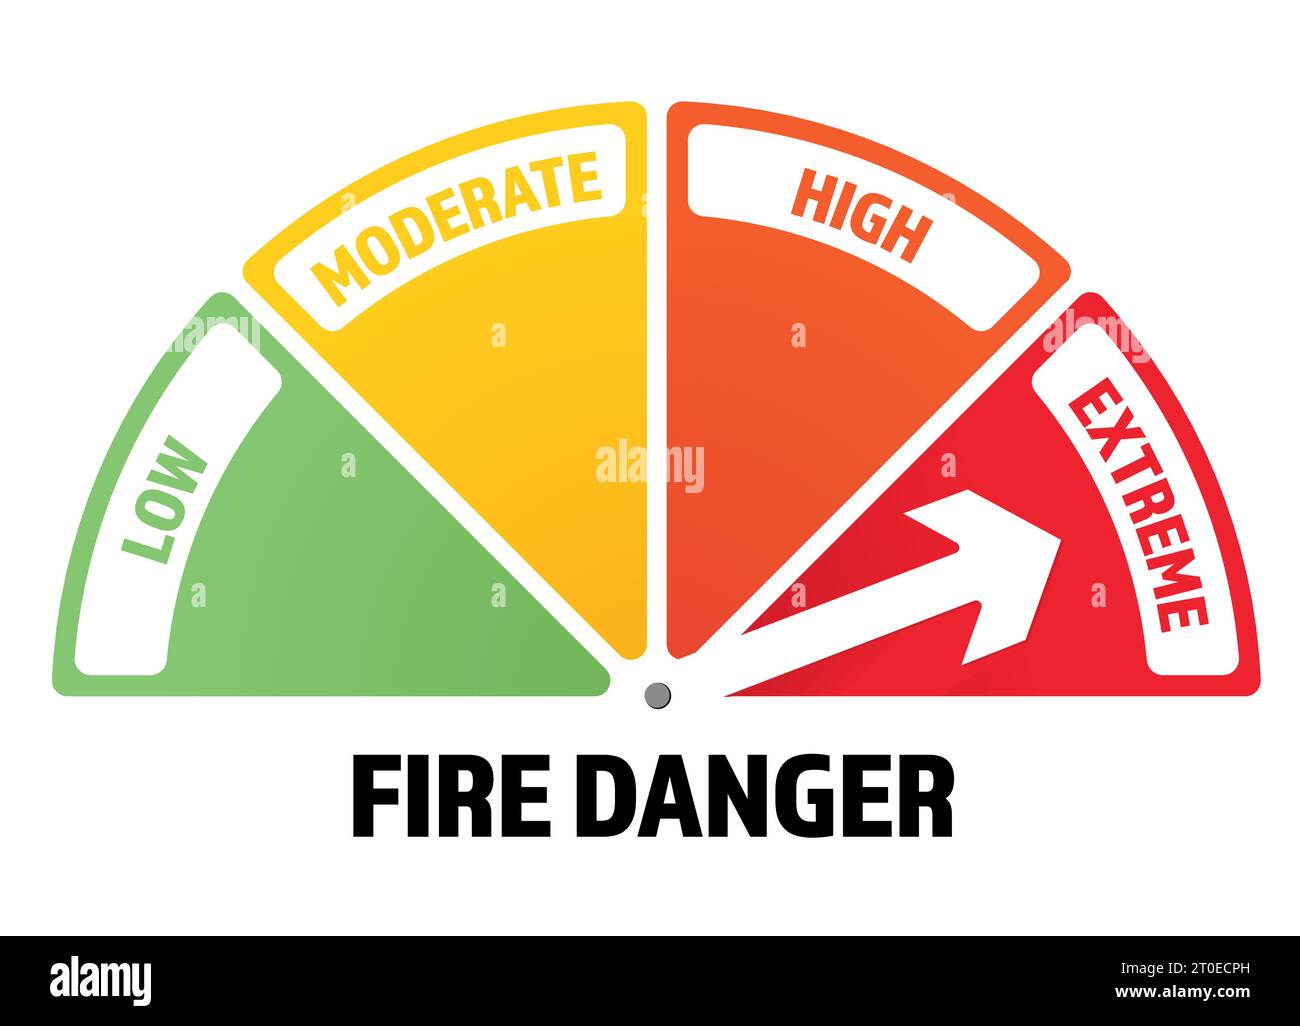 Fire danger rating infographic with arrow on extreme. Used in dry summer months to prevent forest fire or wild fires. Simple rating scale. Stock Vector